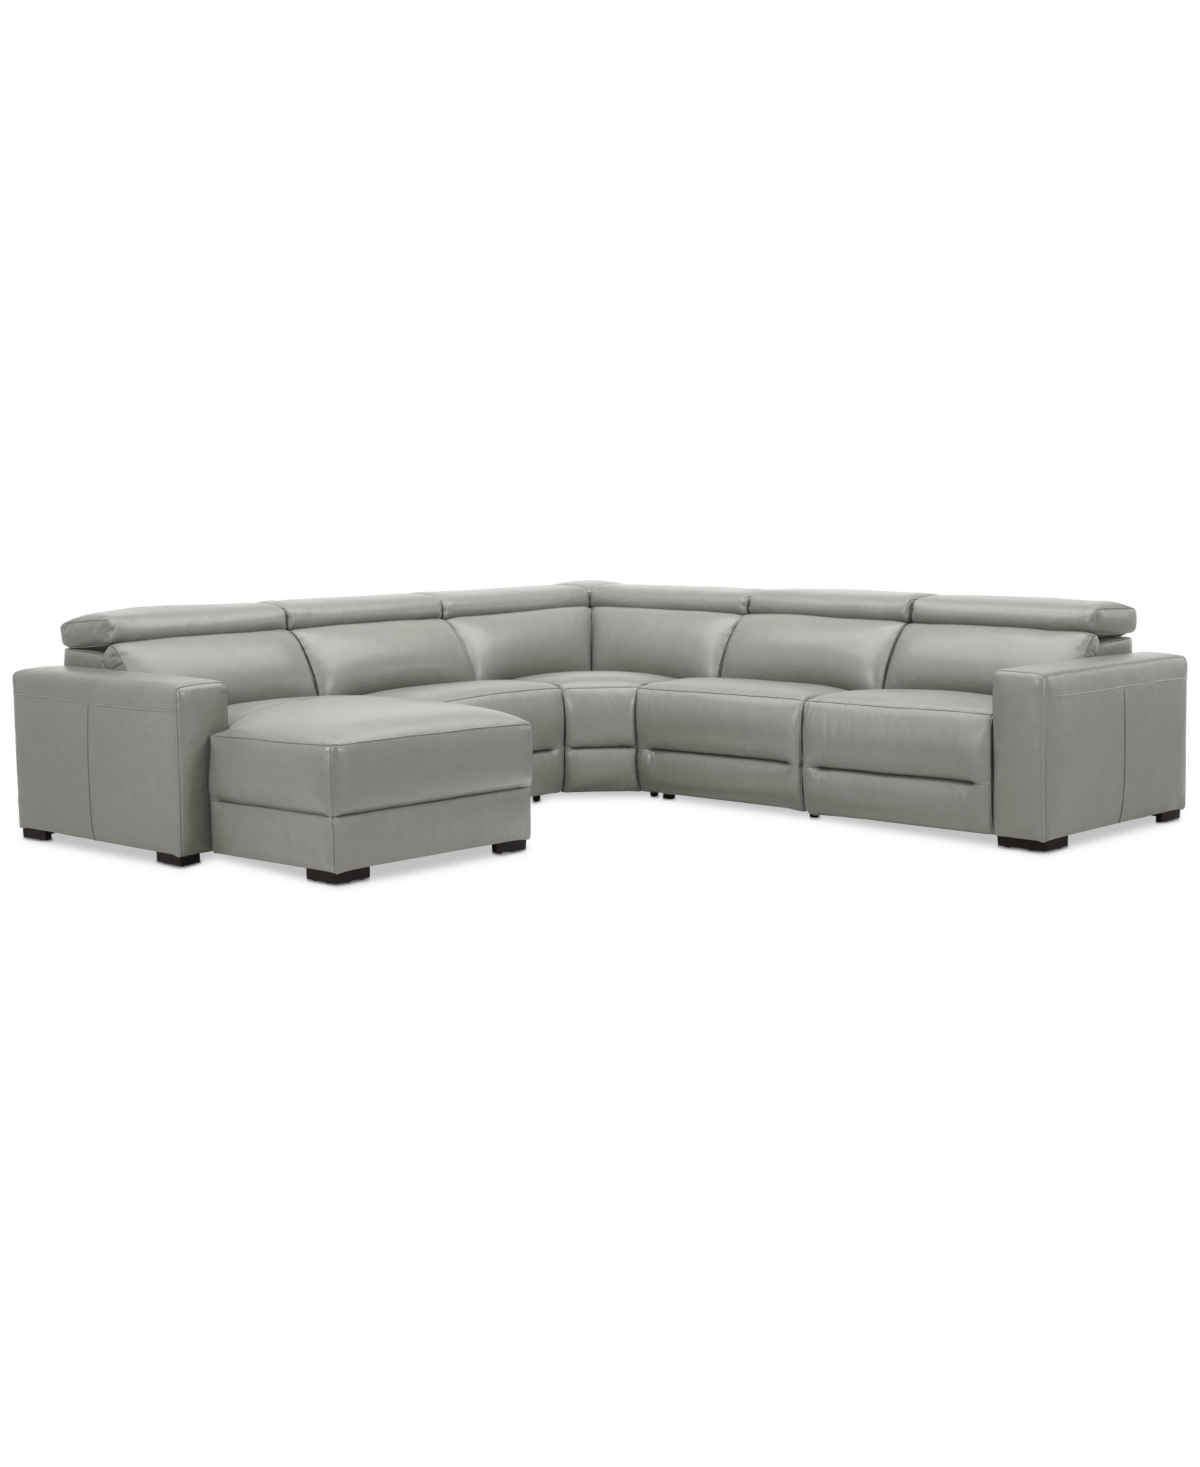 Macy's Nevio 124" 5-pc. Leather Sectional With 2 Power Recliners, Headrests And Chaise, Created For  In Light Grey